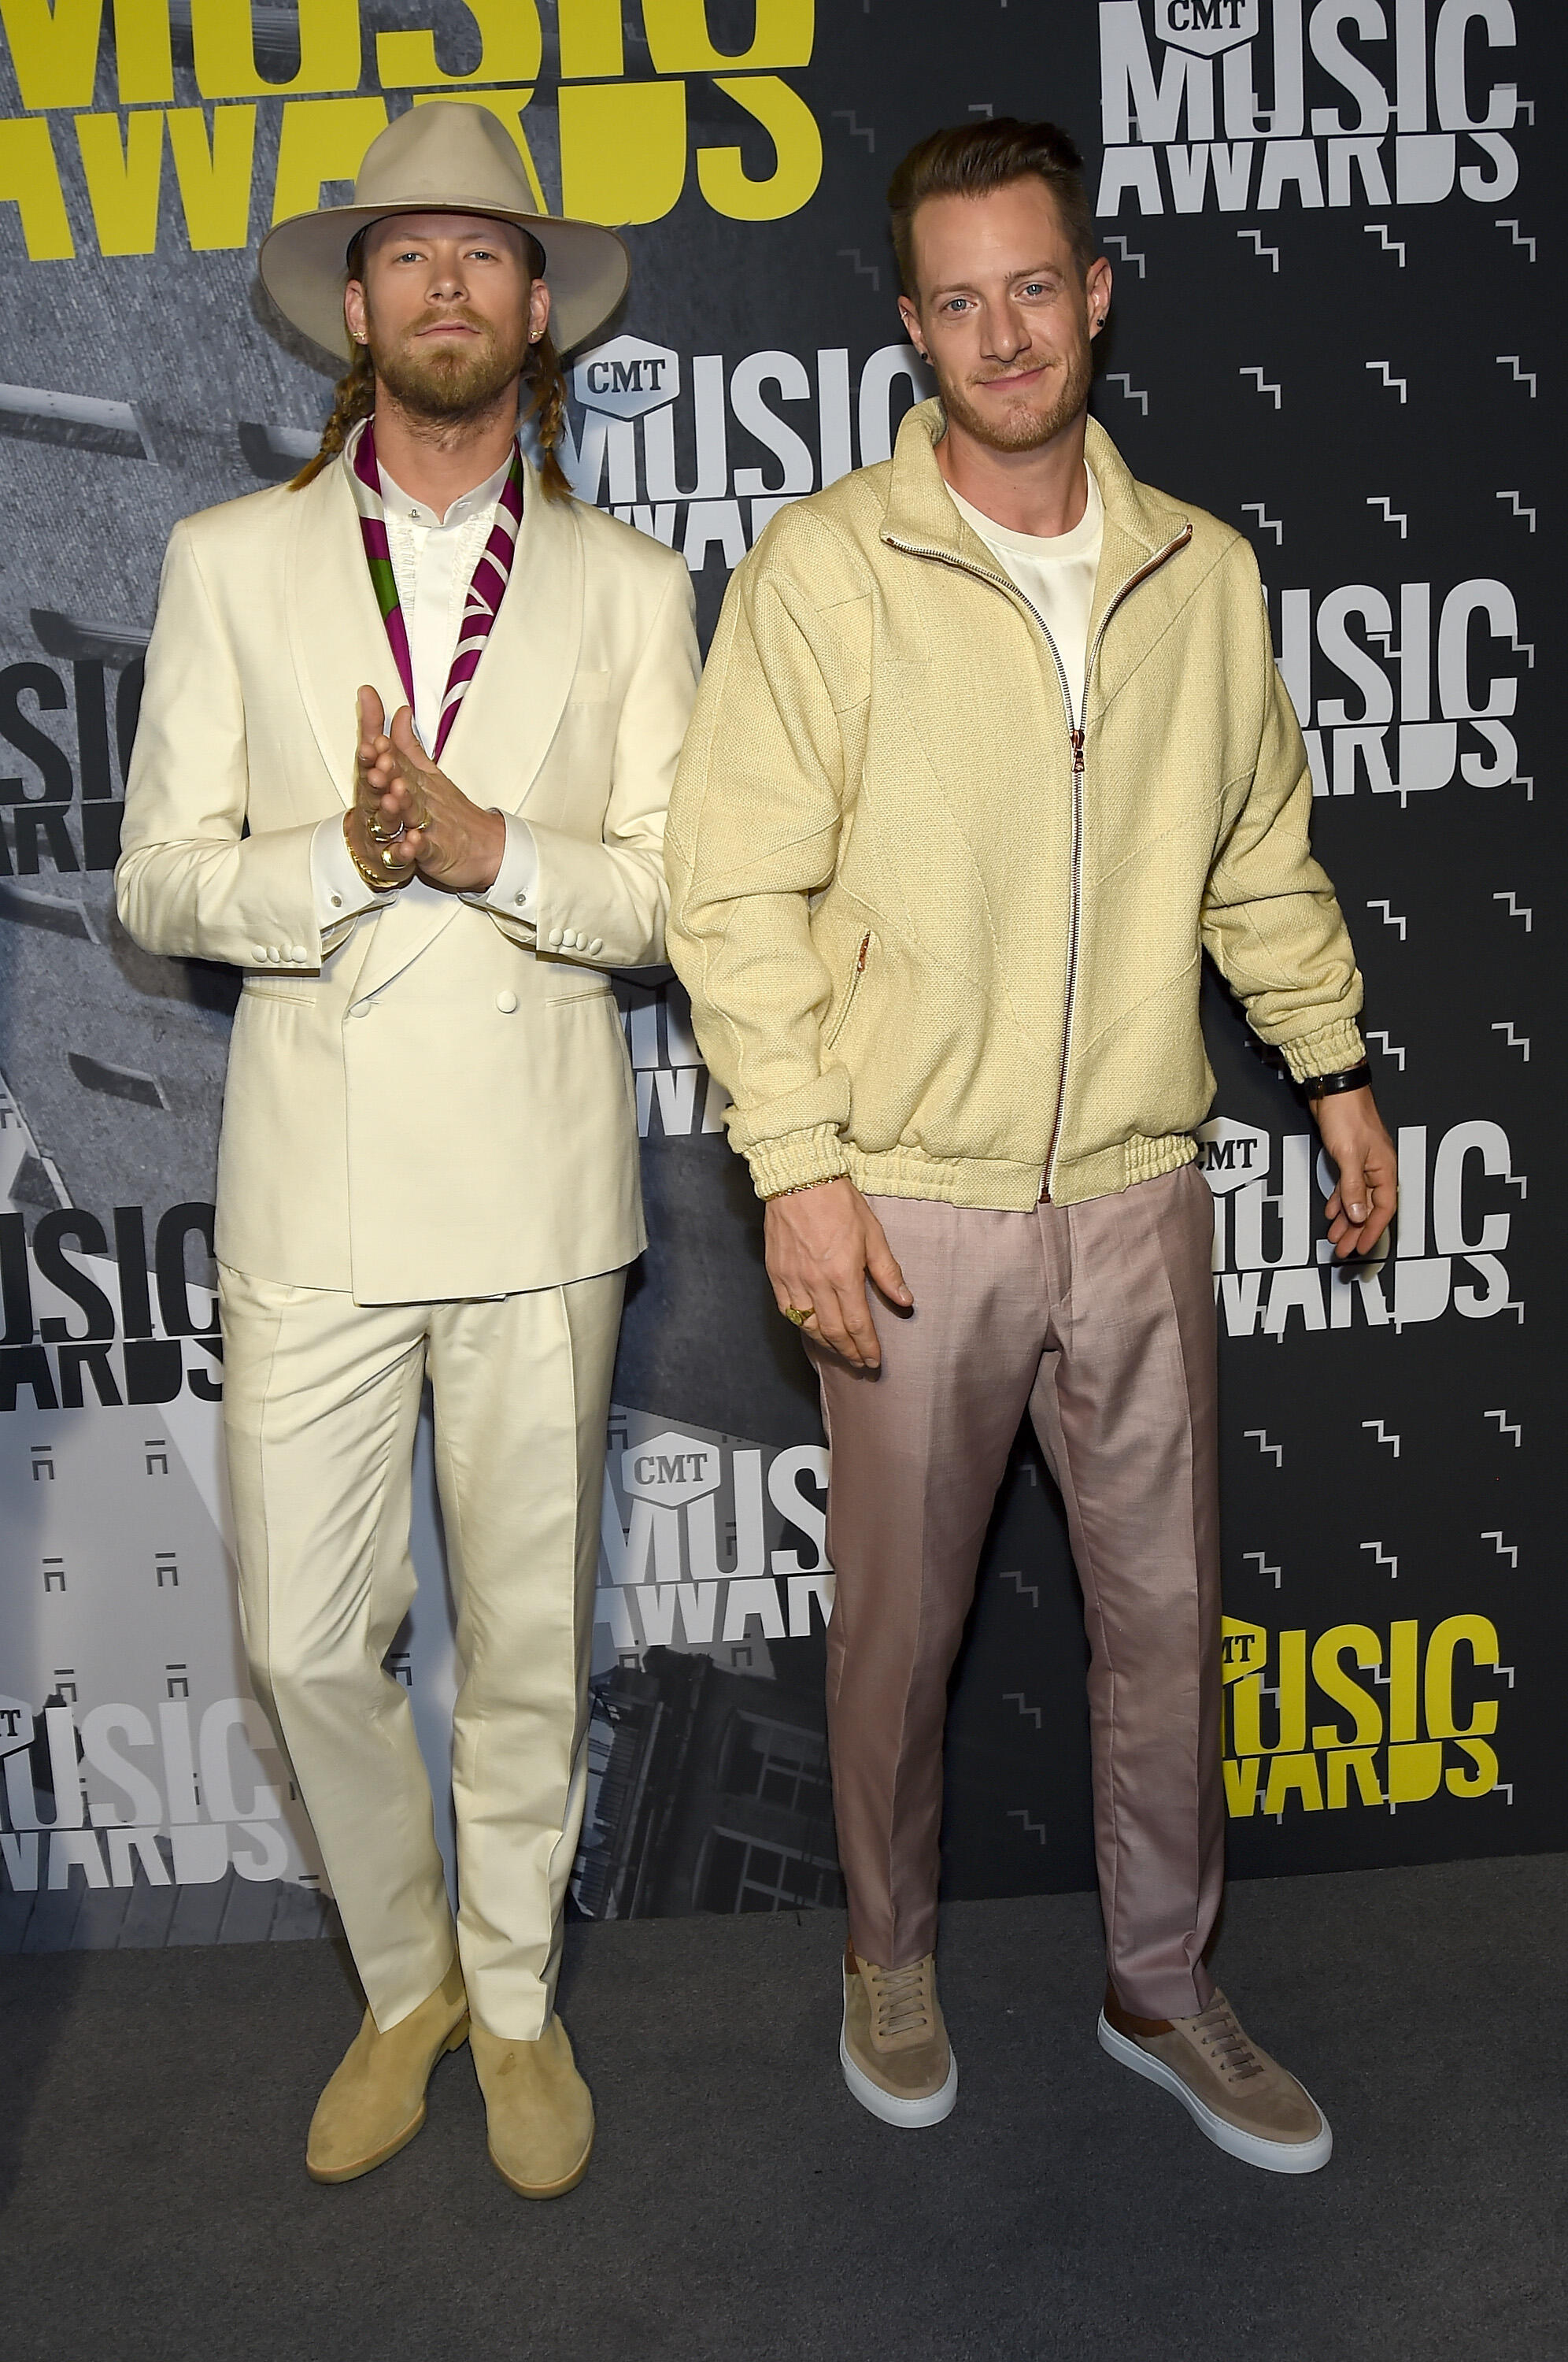 NASHVILLE, TN - JUNE 07: Brian Kelley and Tyler Hubbard of Florida Georgia Line attend the 2017 CMT Music awards at the Music City Center on June 7, 2017 in Nashville, Tennessee.  (Photo by Rick Diamond/Getty Images for CMT)